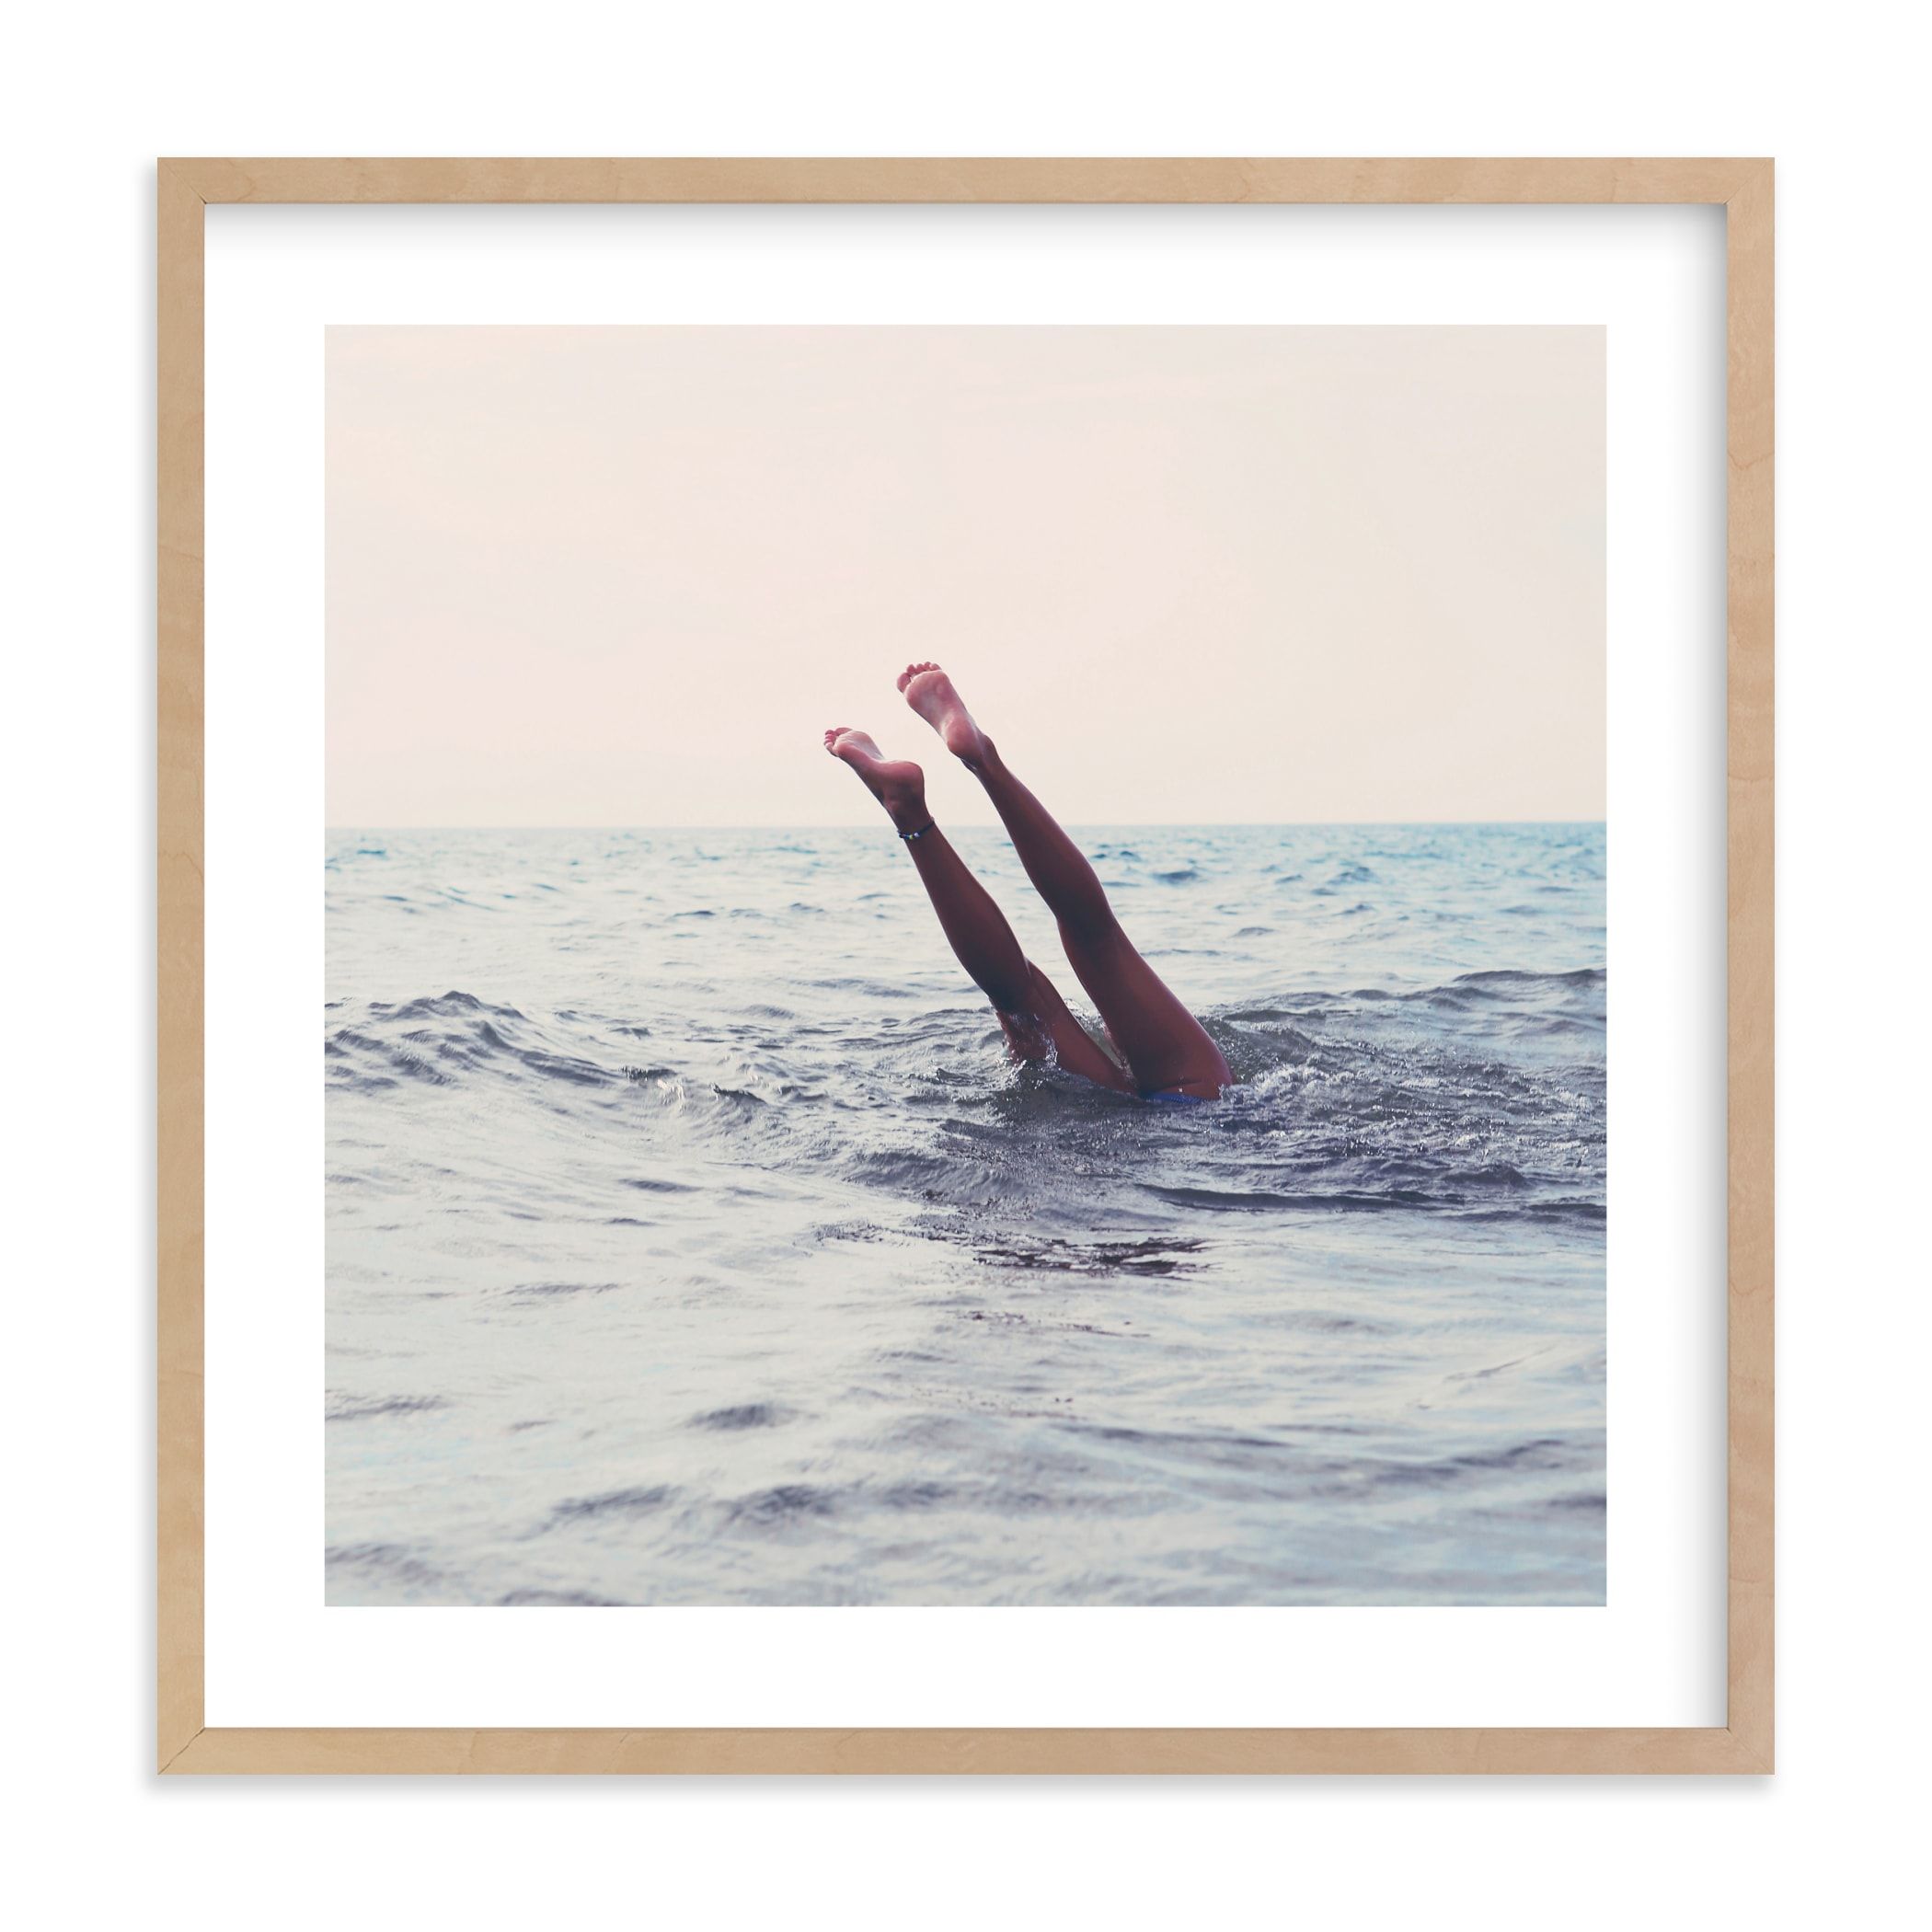 "Summer Handstand" - Photography Limited Edition Art Print by ALICIA BOCK. | Minted